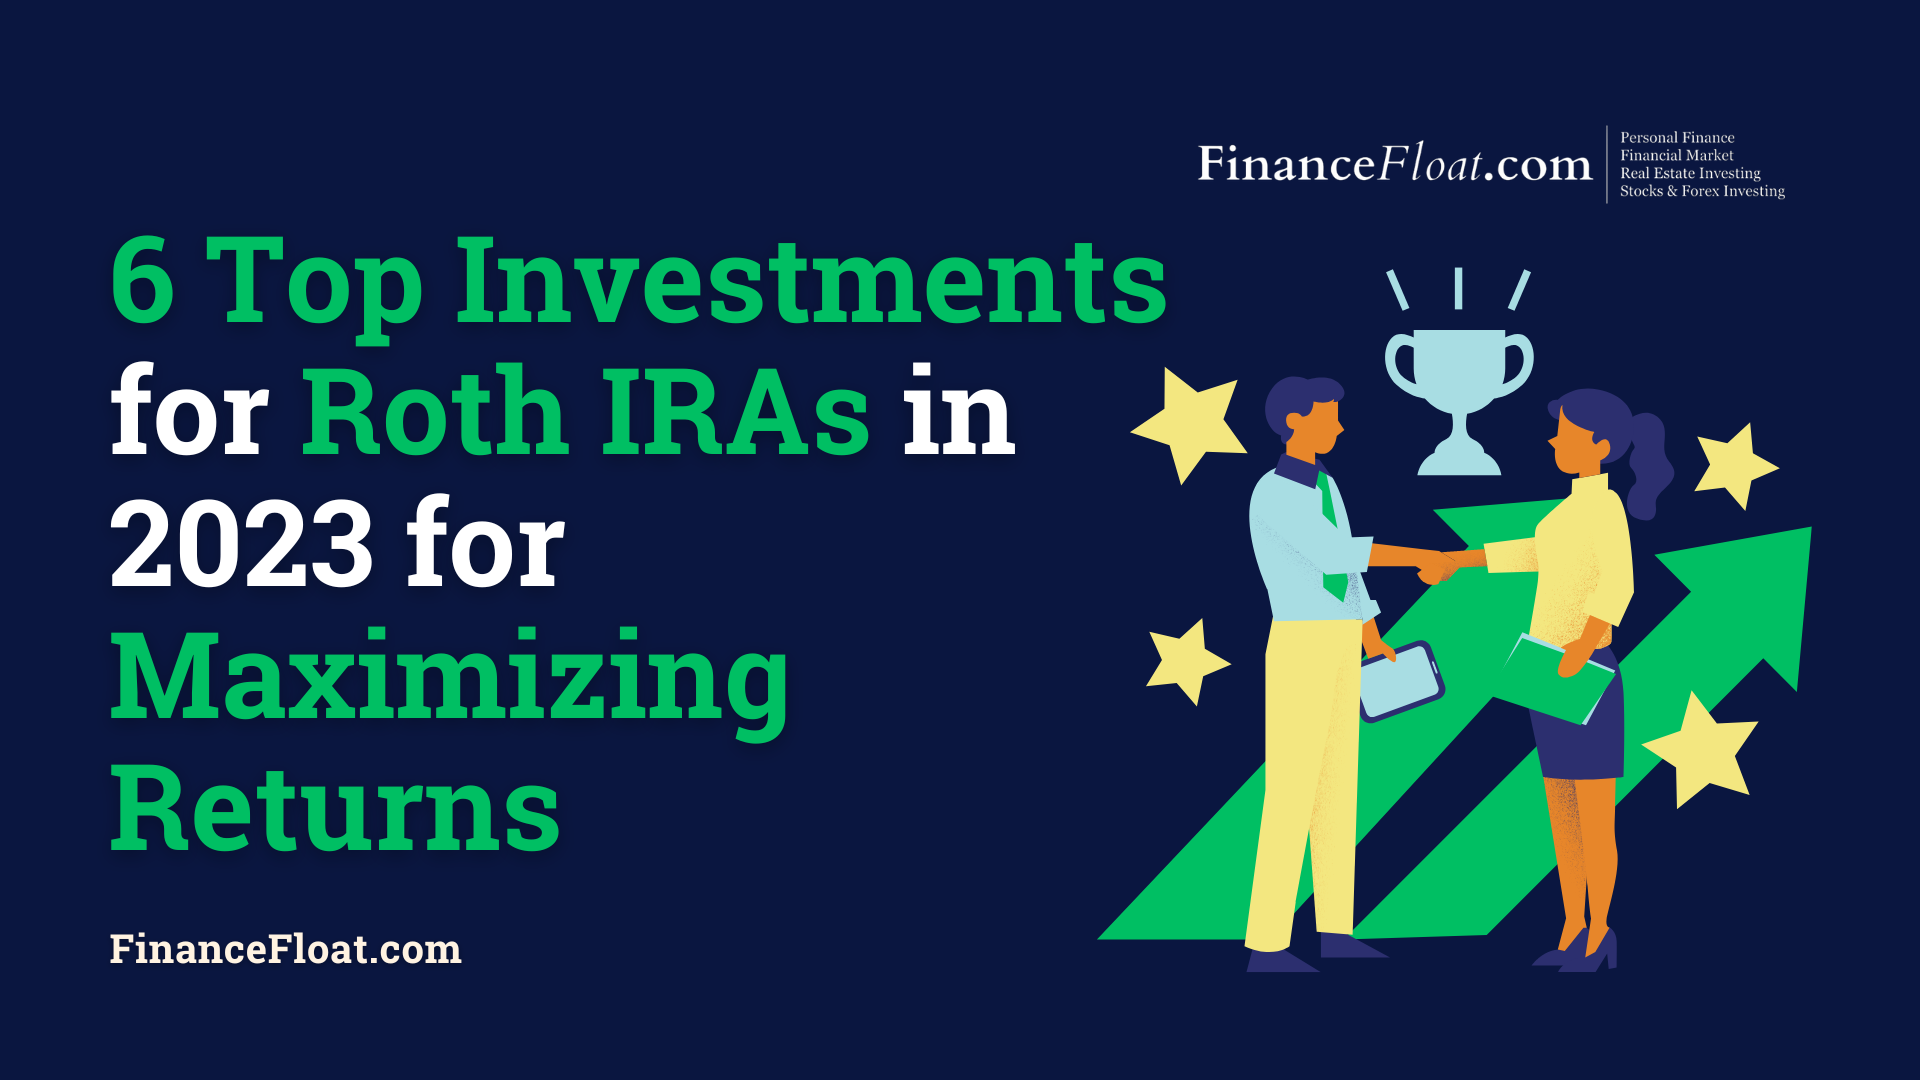 6 Top Investments for Roth IRAs in 2023 for Maximizing Returns